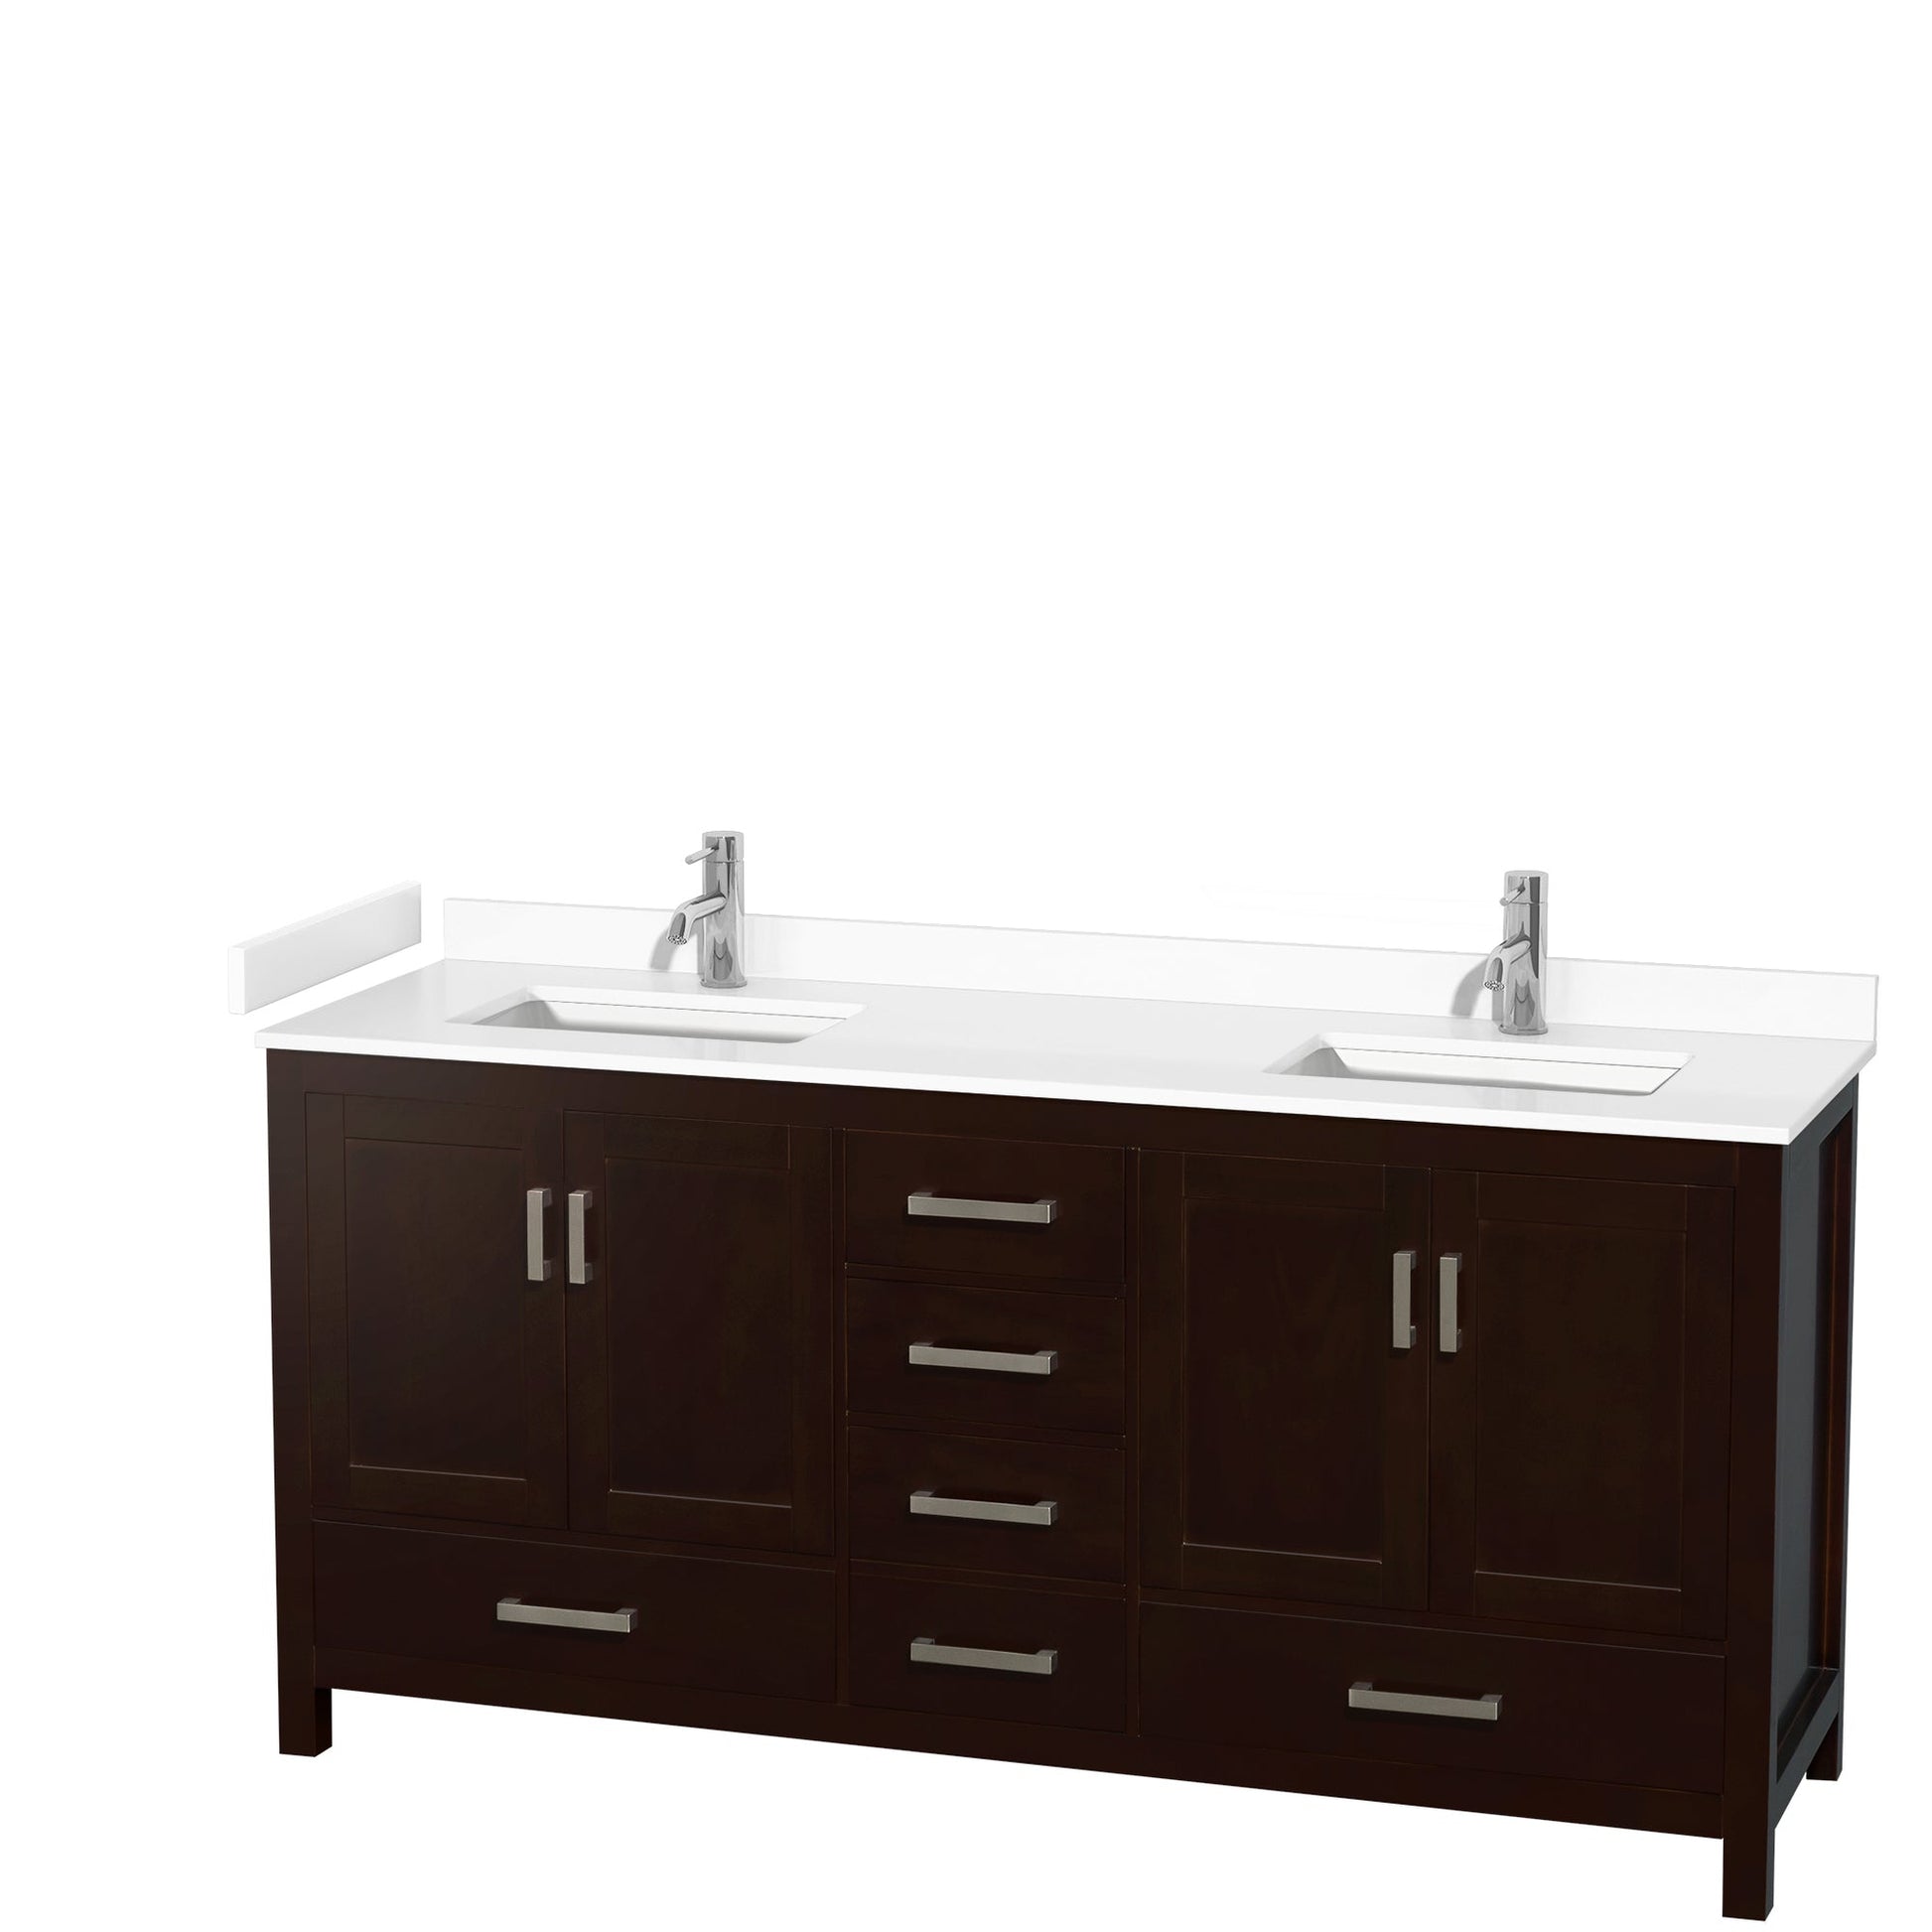 Wyndham Collection Sheffield 72" Double Bathroom Vanity in Espresso, White Cultured Marble Countertop, Undermount Square Sinks, No Mirror